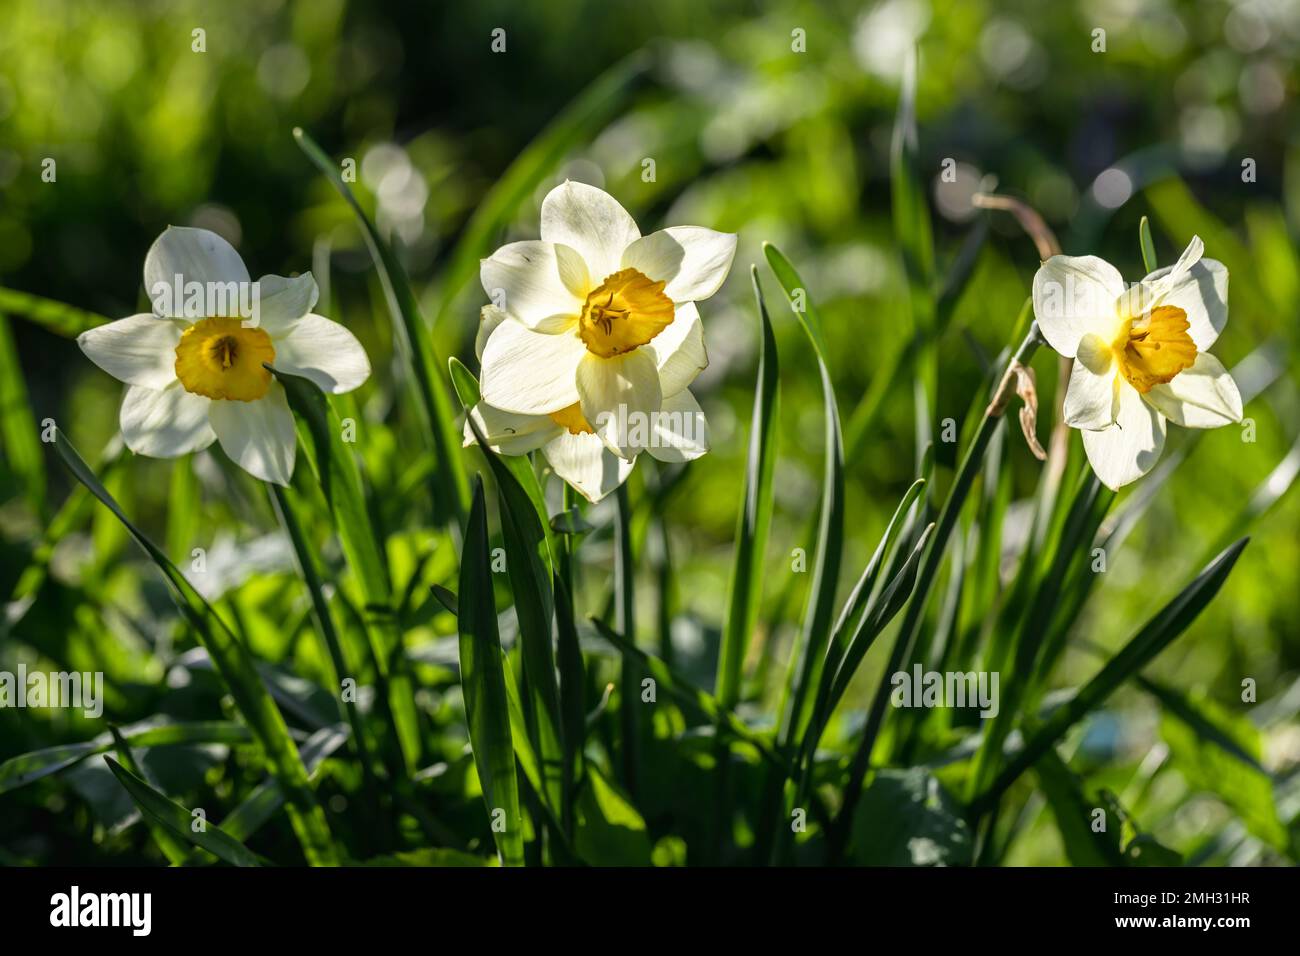 Narcissus flowers flower bed with drift yellow. White double daffodil flowers narcissi daffodils.  Stock Photo